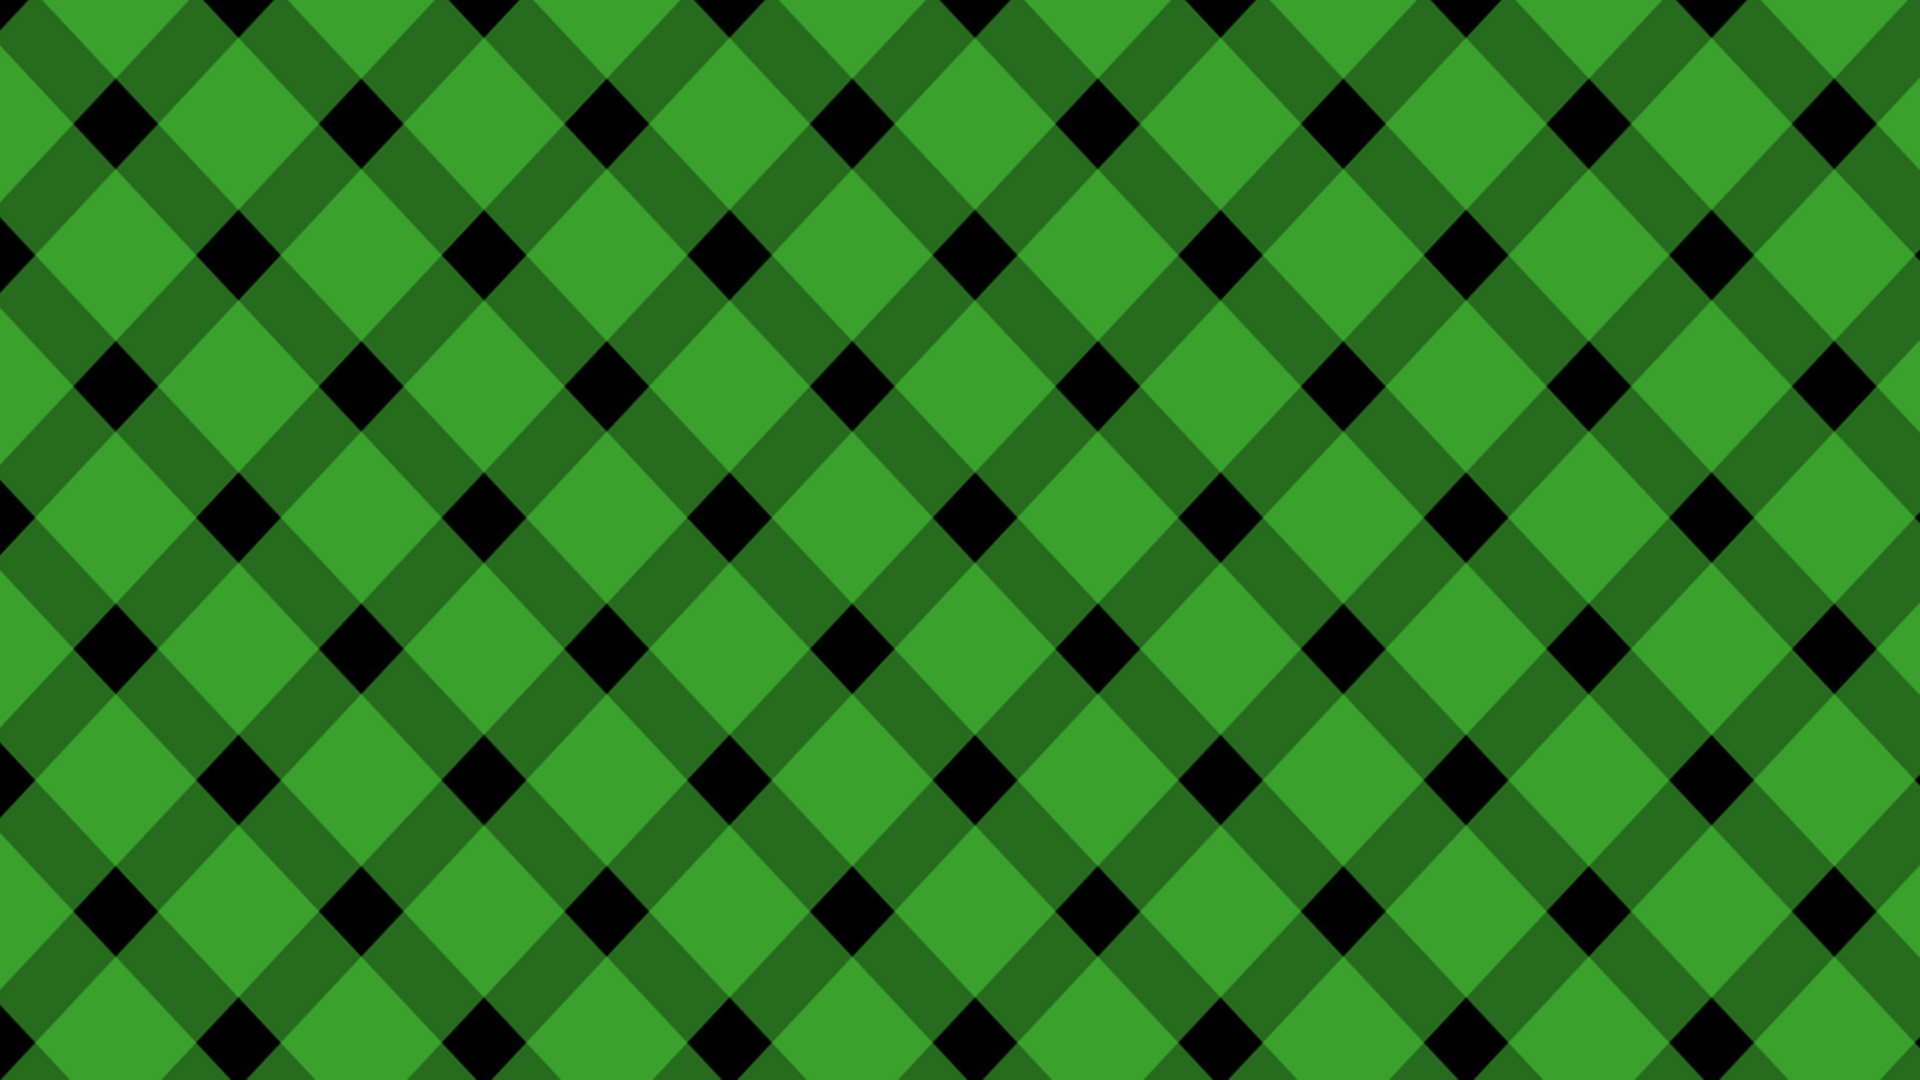 Green Plaid Pattern Plaid Background Wallpaper Image For Free Download   Pngtree